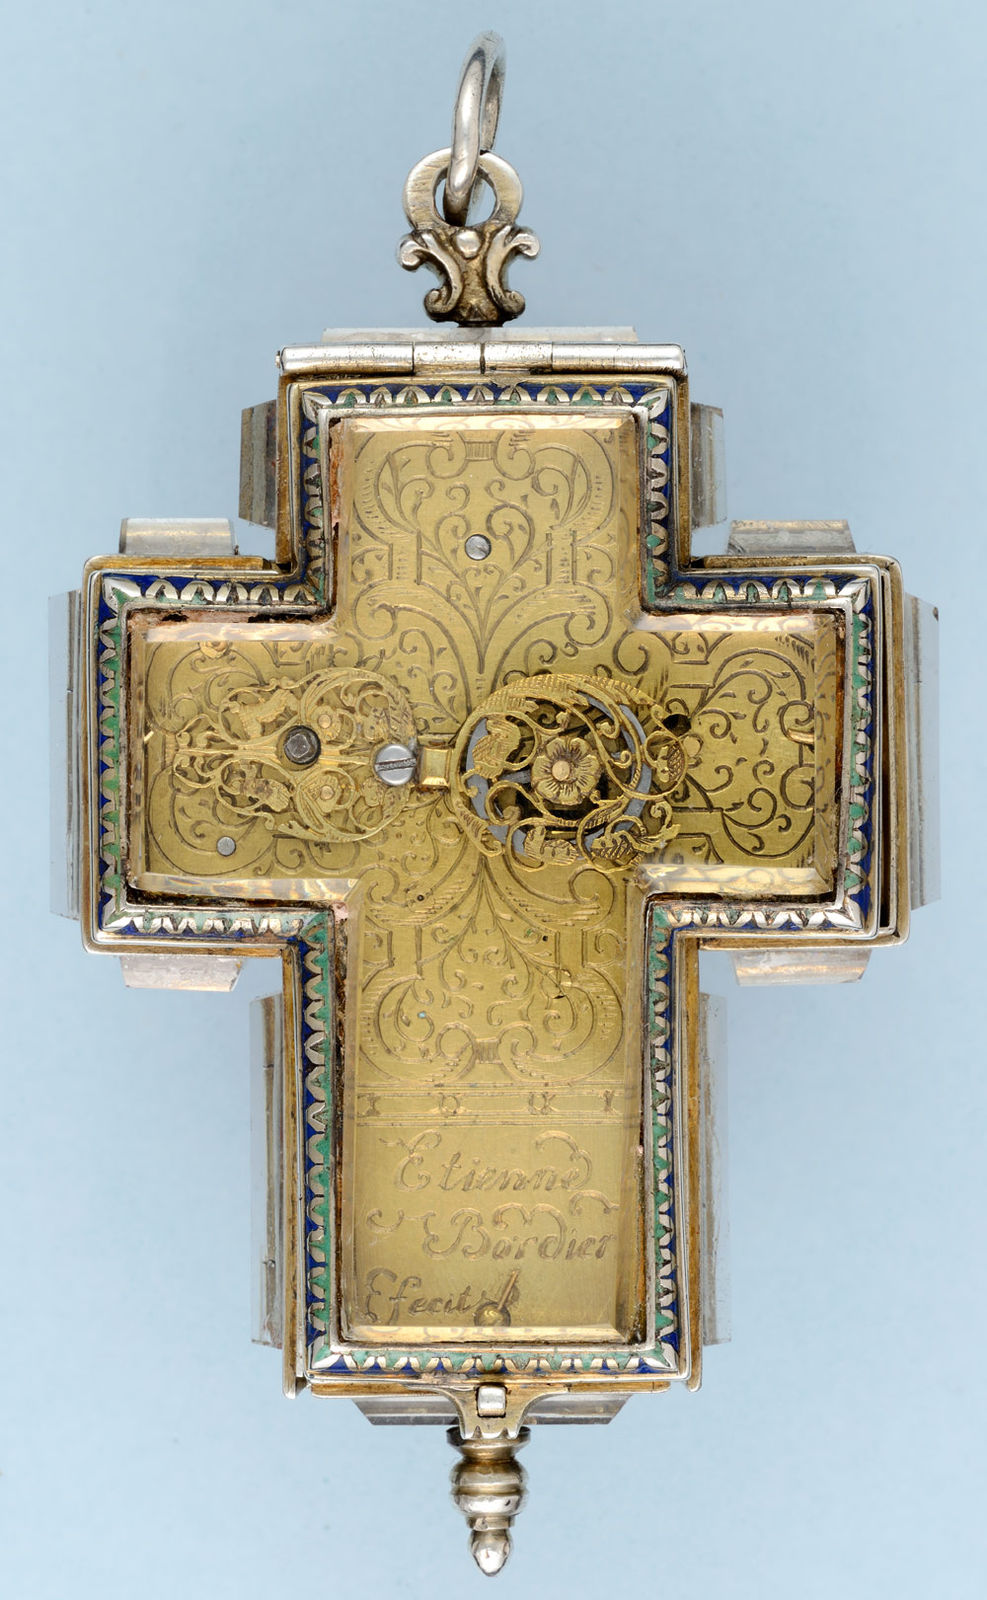 Rare Crucifix Form Watch - Image 3 of 7